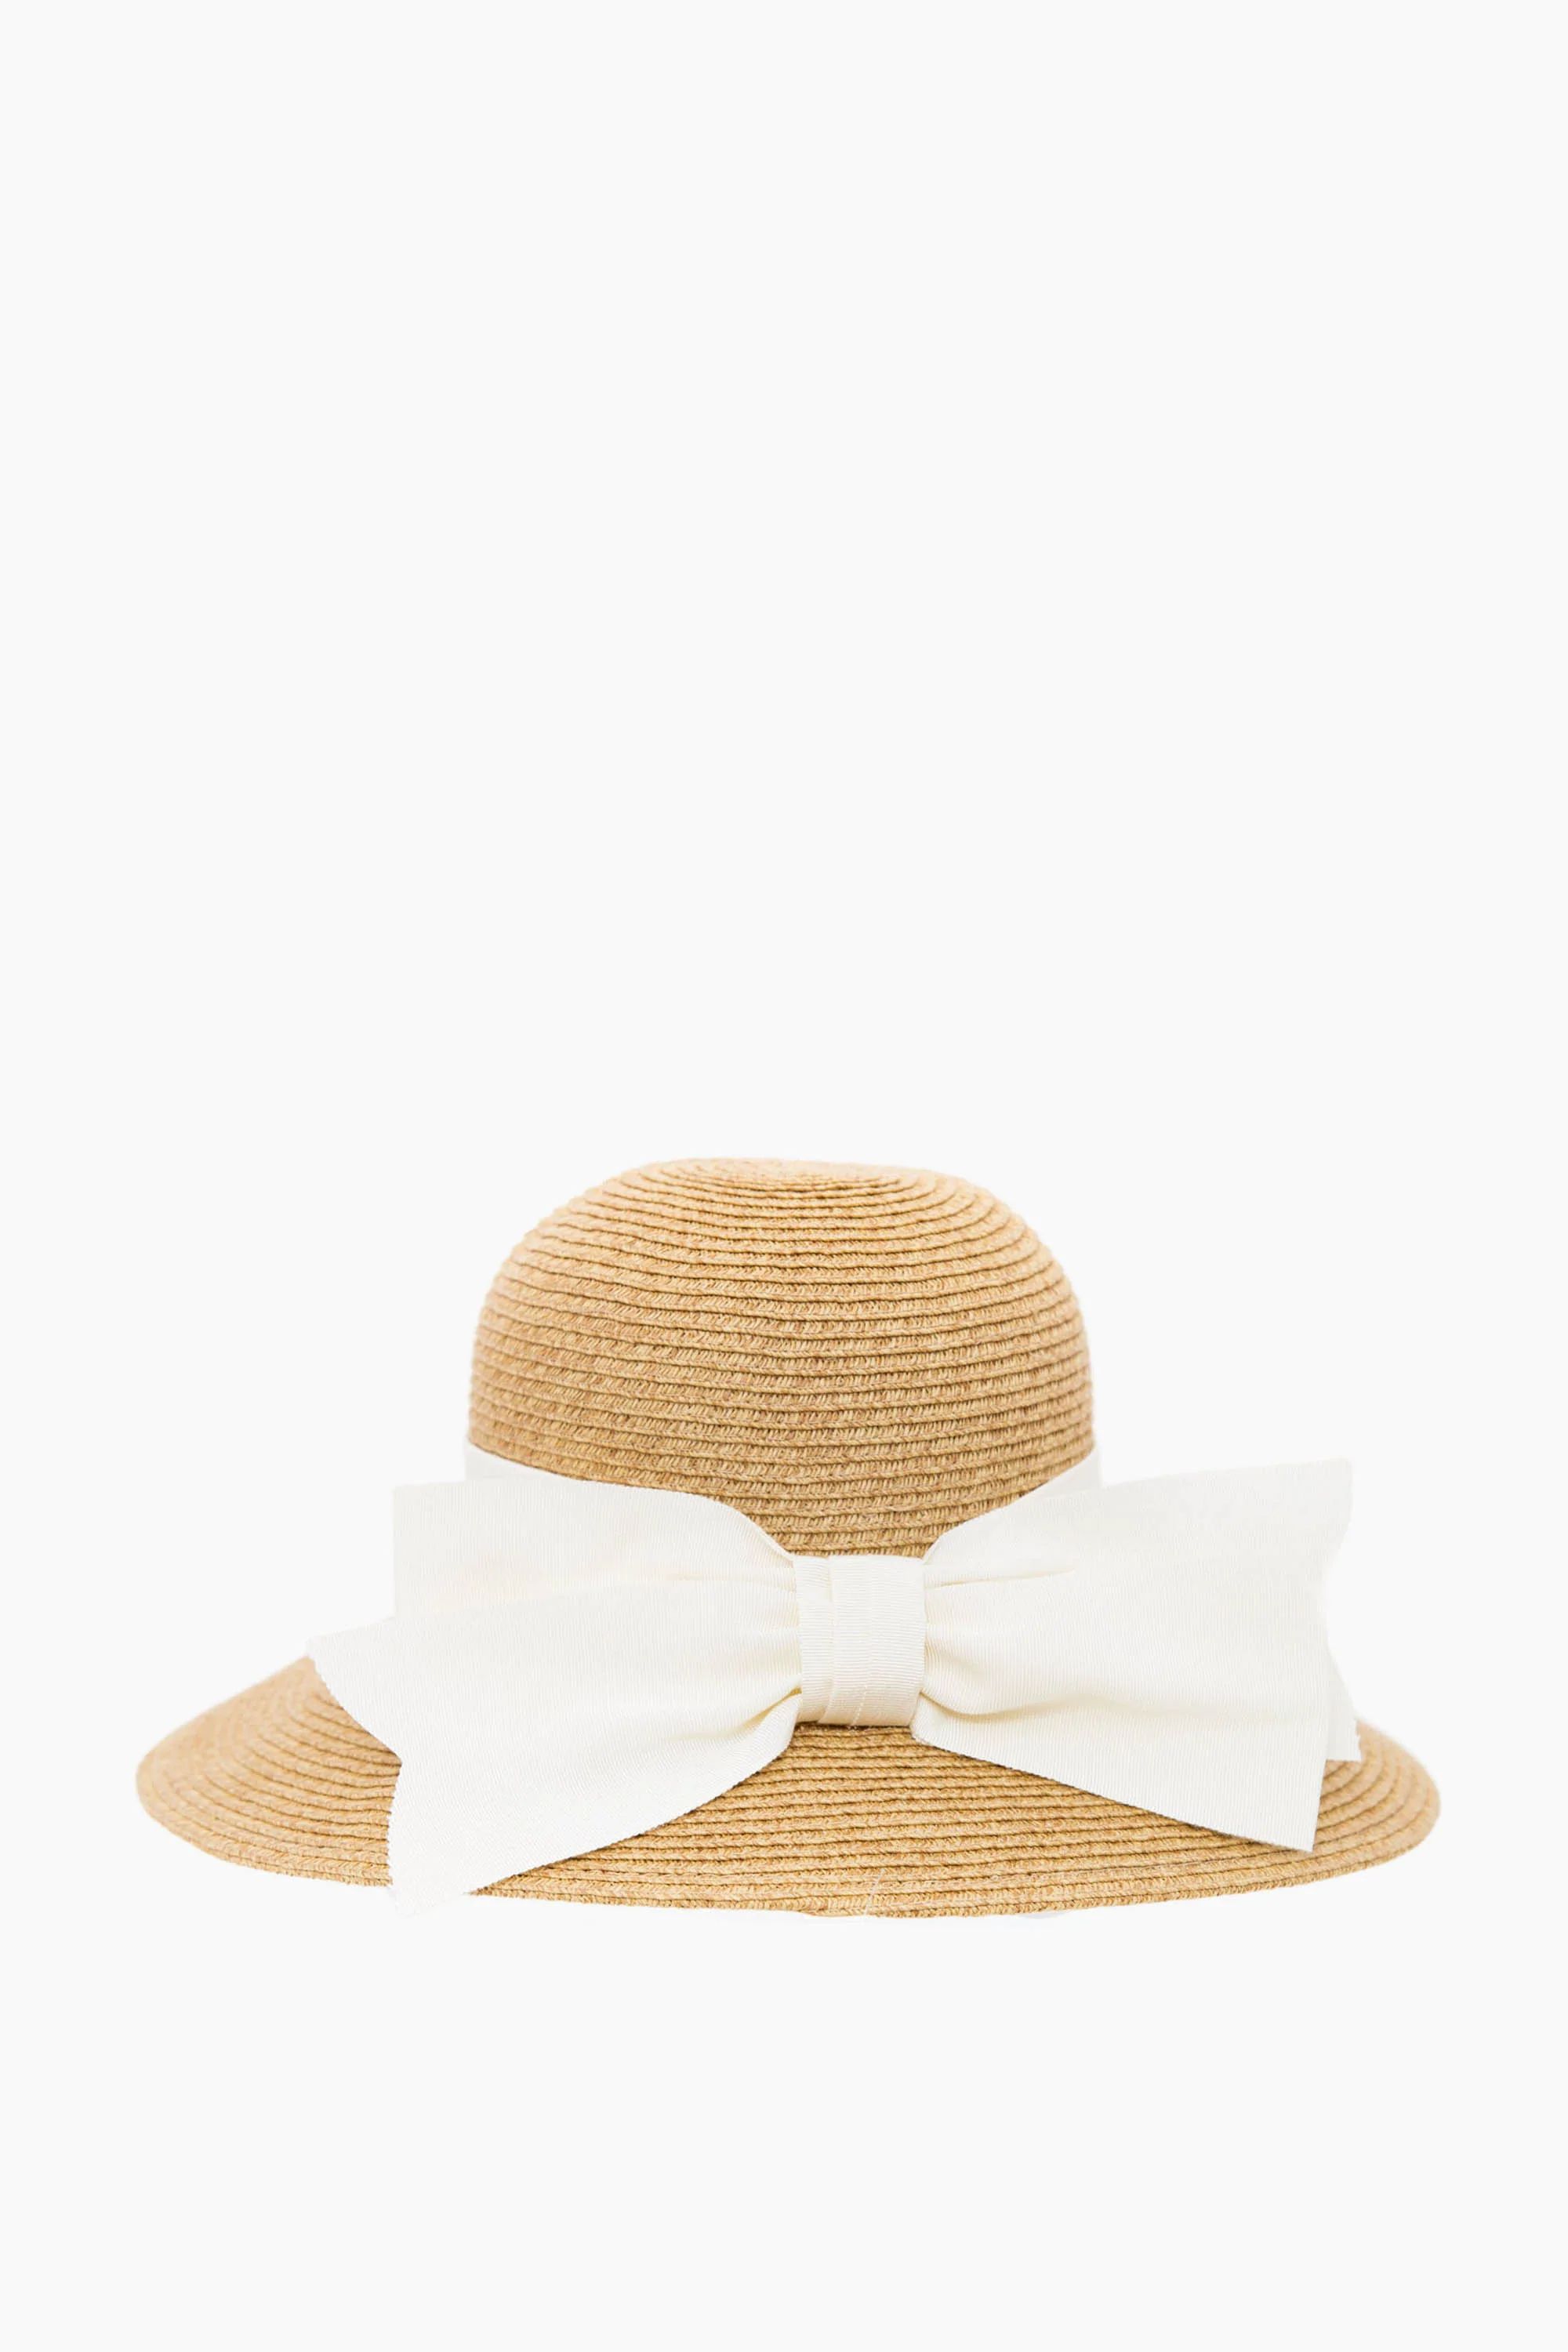 Exclusive Cream Packable Wide Bow Sunhat | Tuckernuck (US)